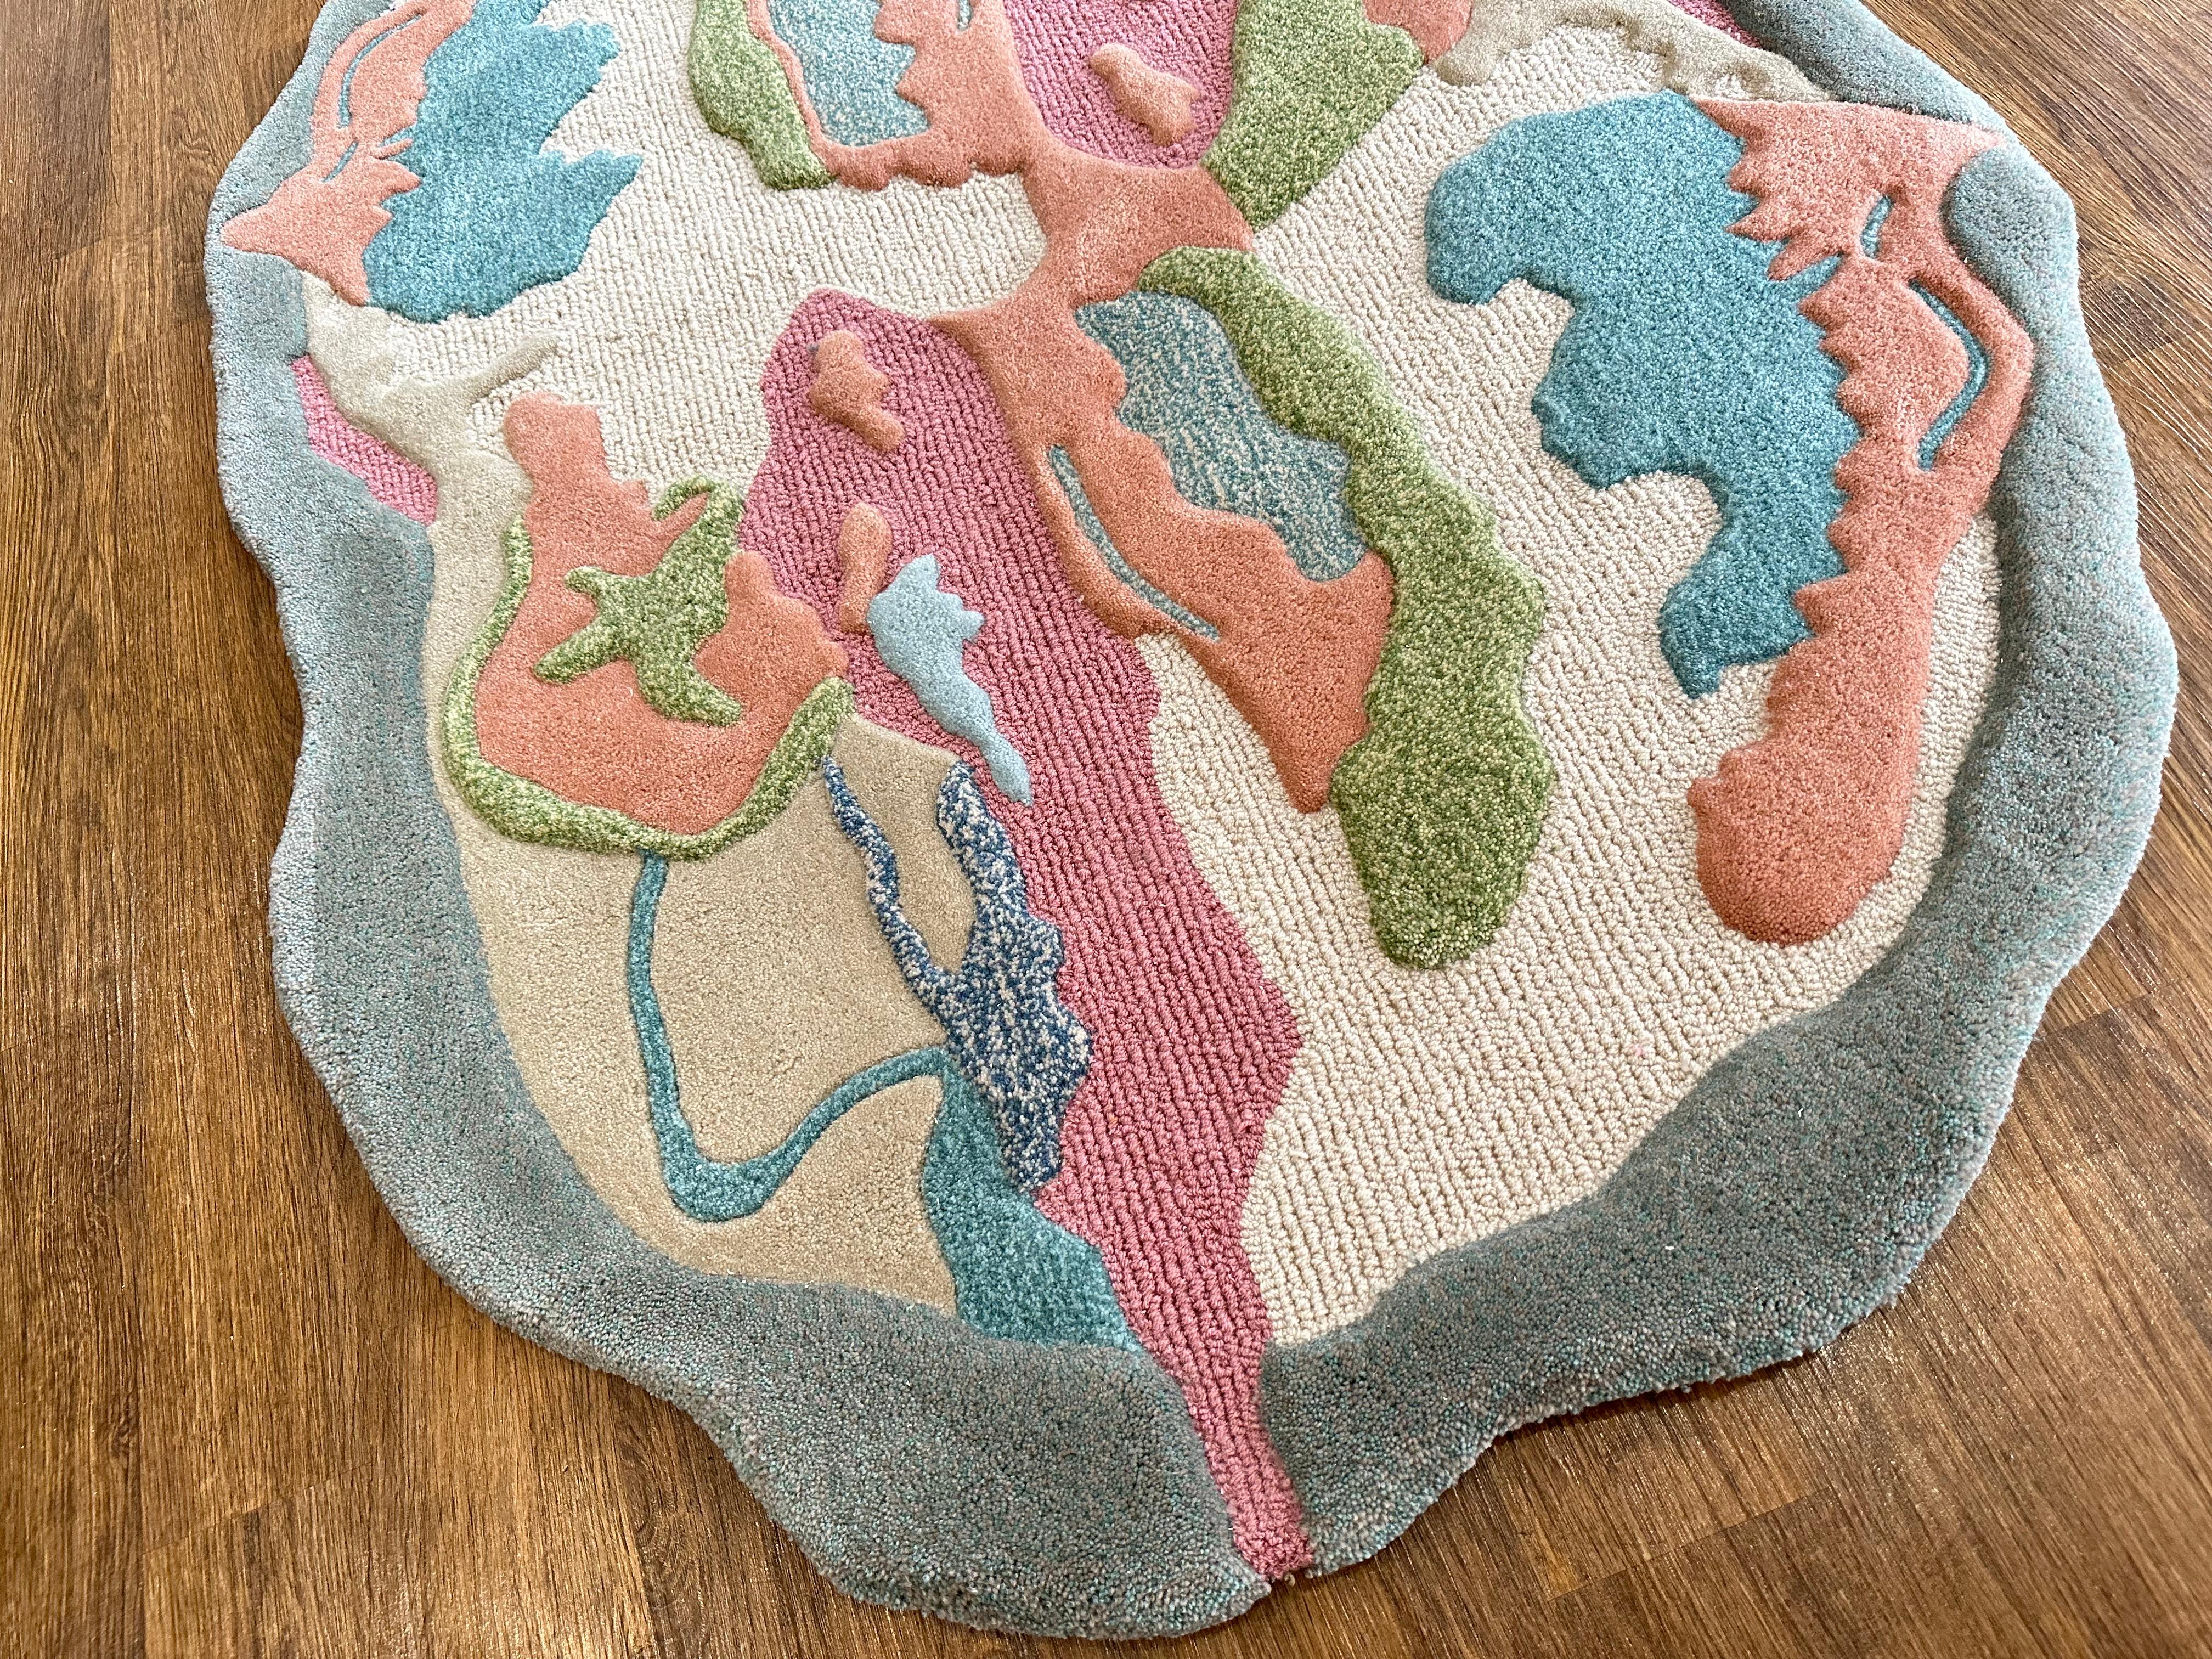 Just in a gooey-shaped, slimy pastel goodness cheekily tucked into an abstract, squiggly oval rug-a fresh addition to RAG Home's playful rug lineup.

Custom in size and color.